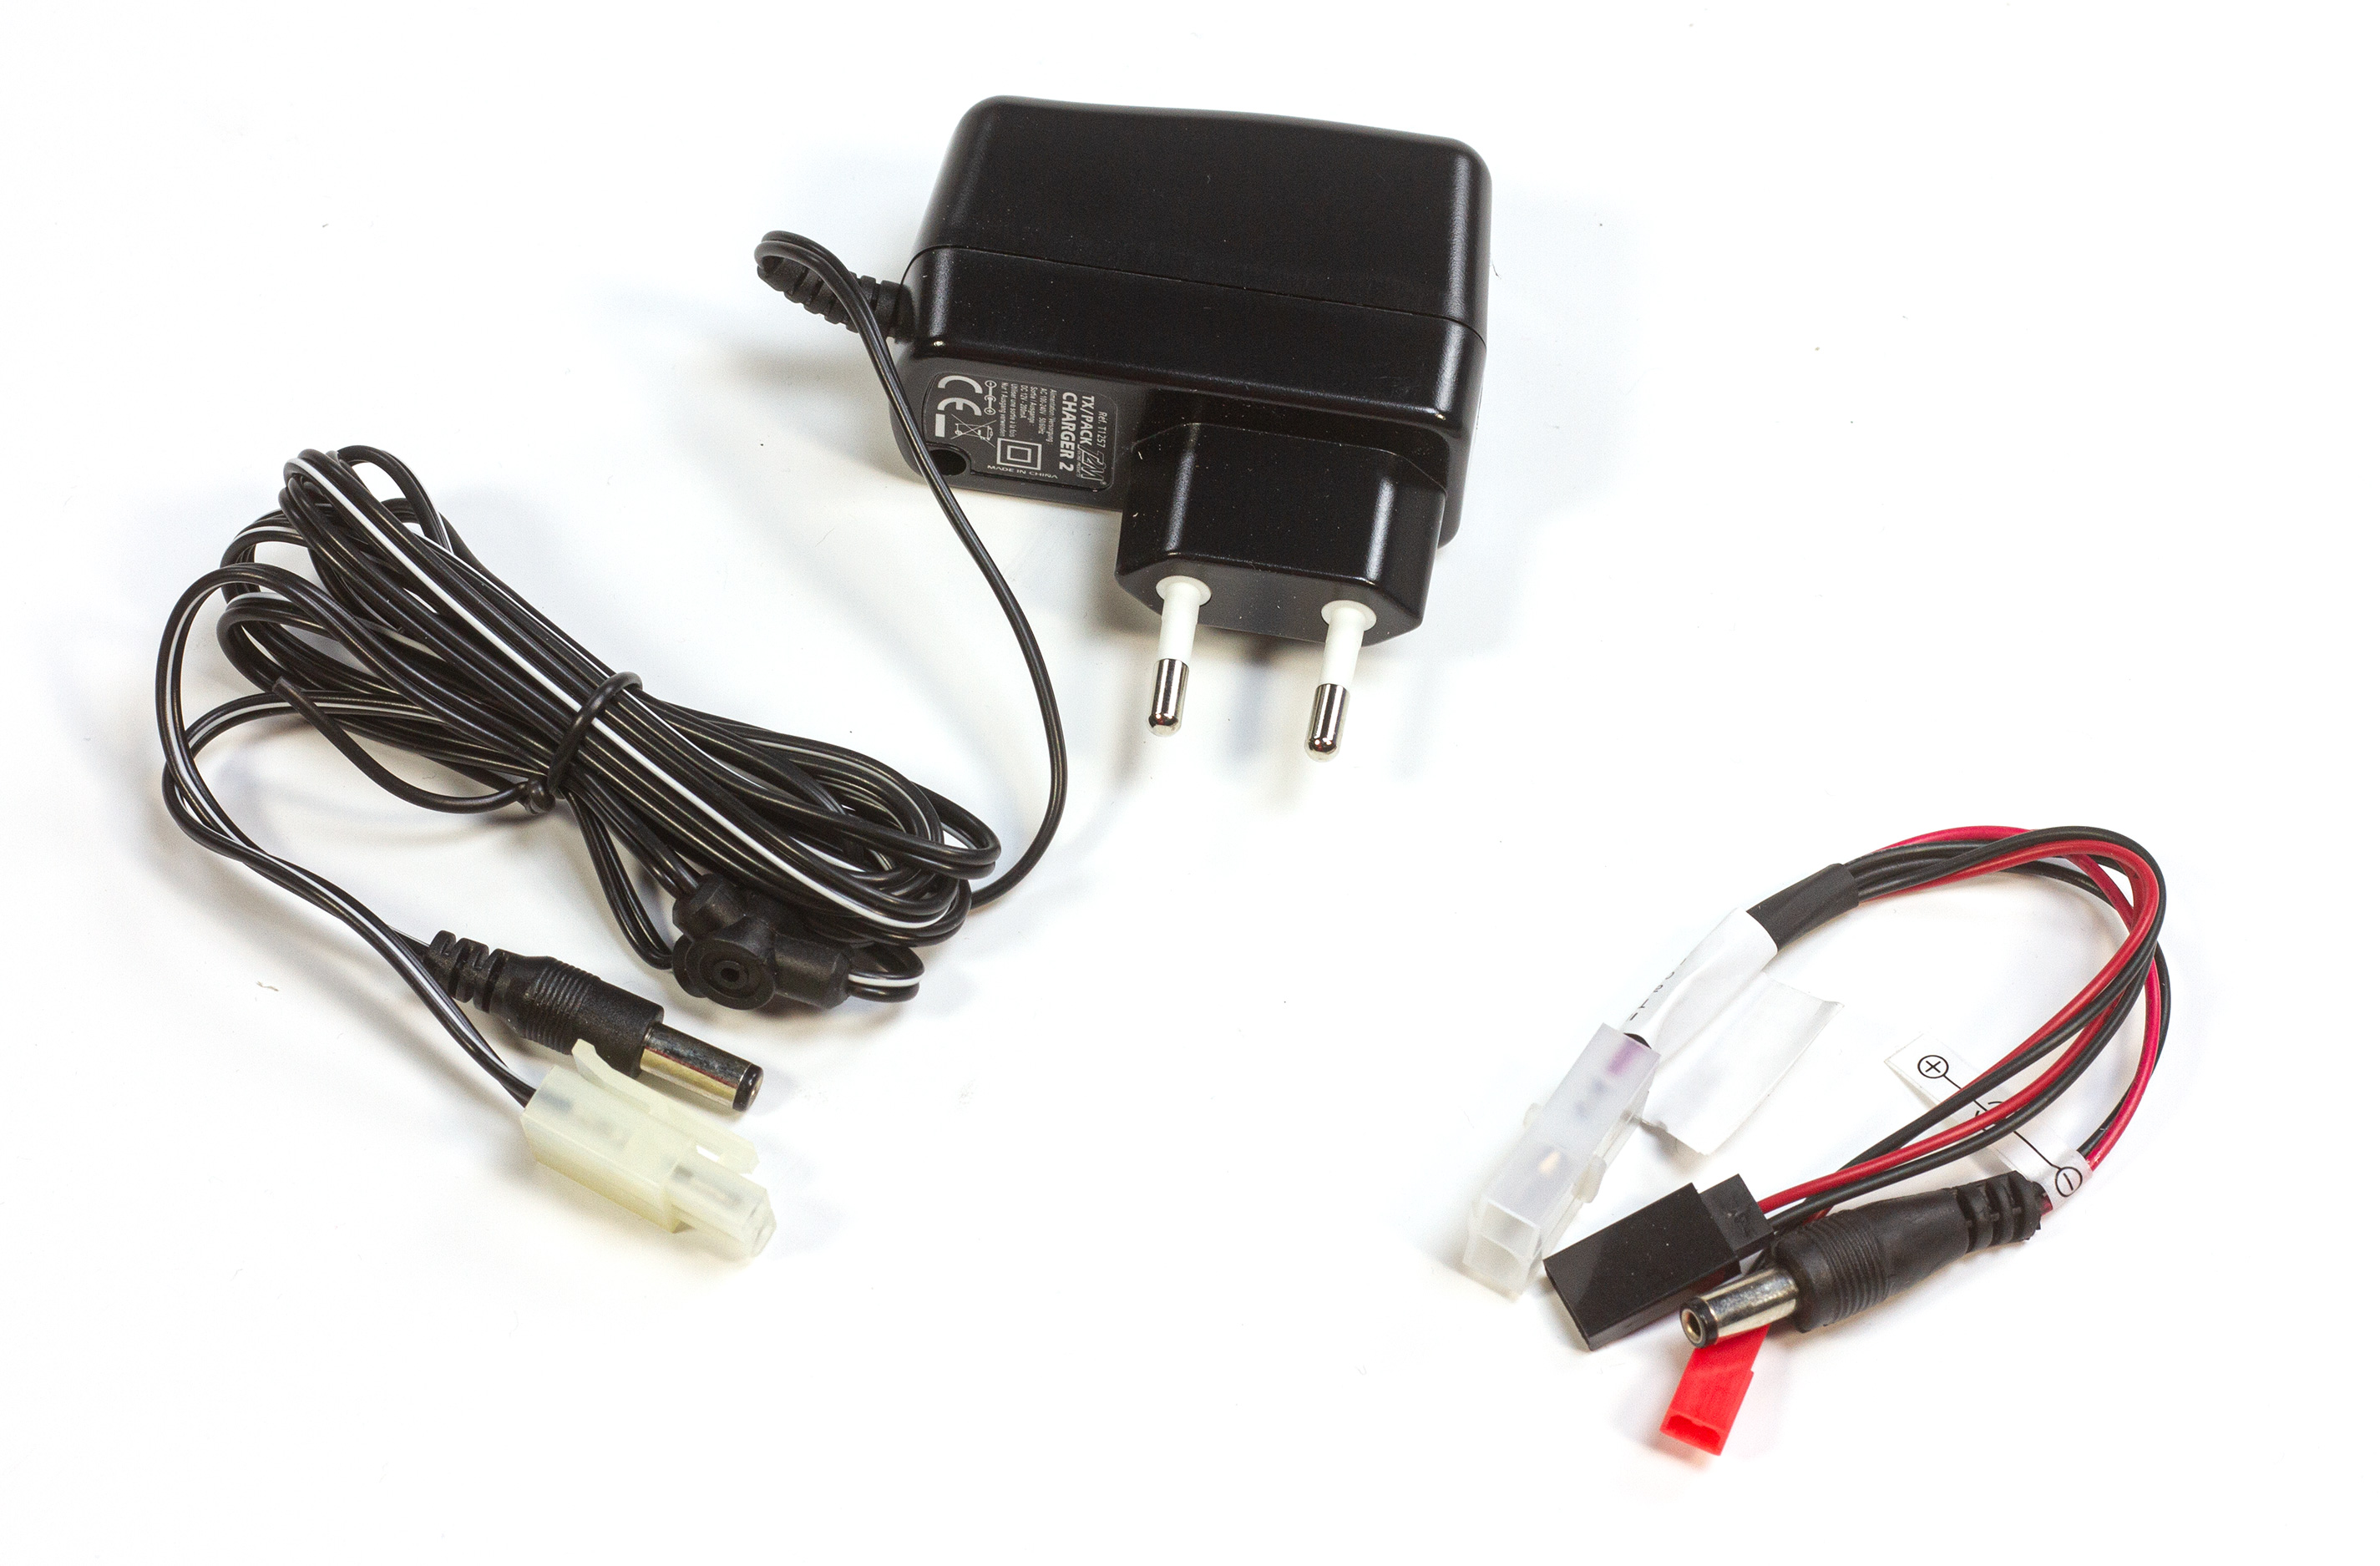 T1257 FG Universal Charger with many adaptor cables